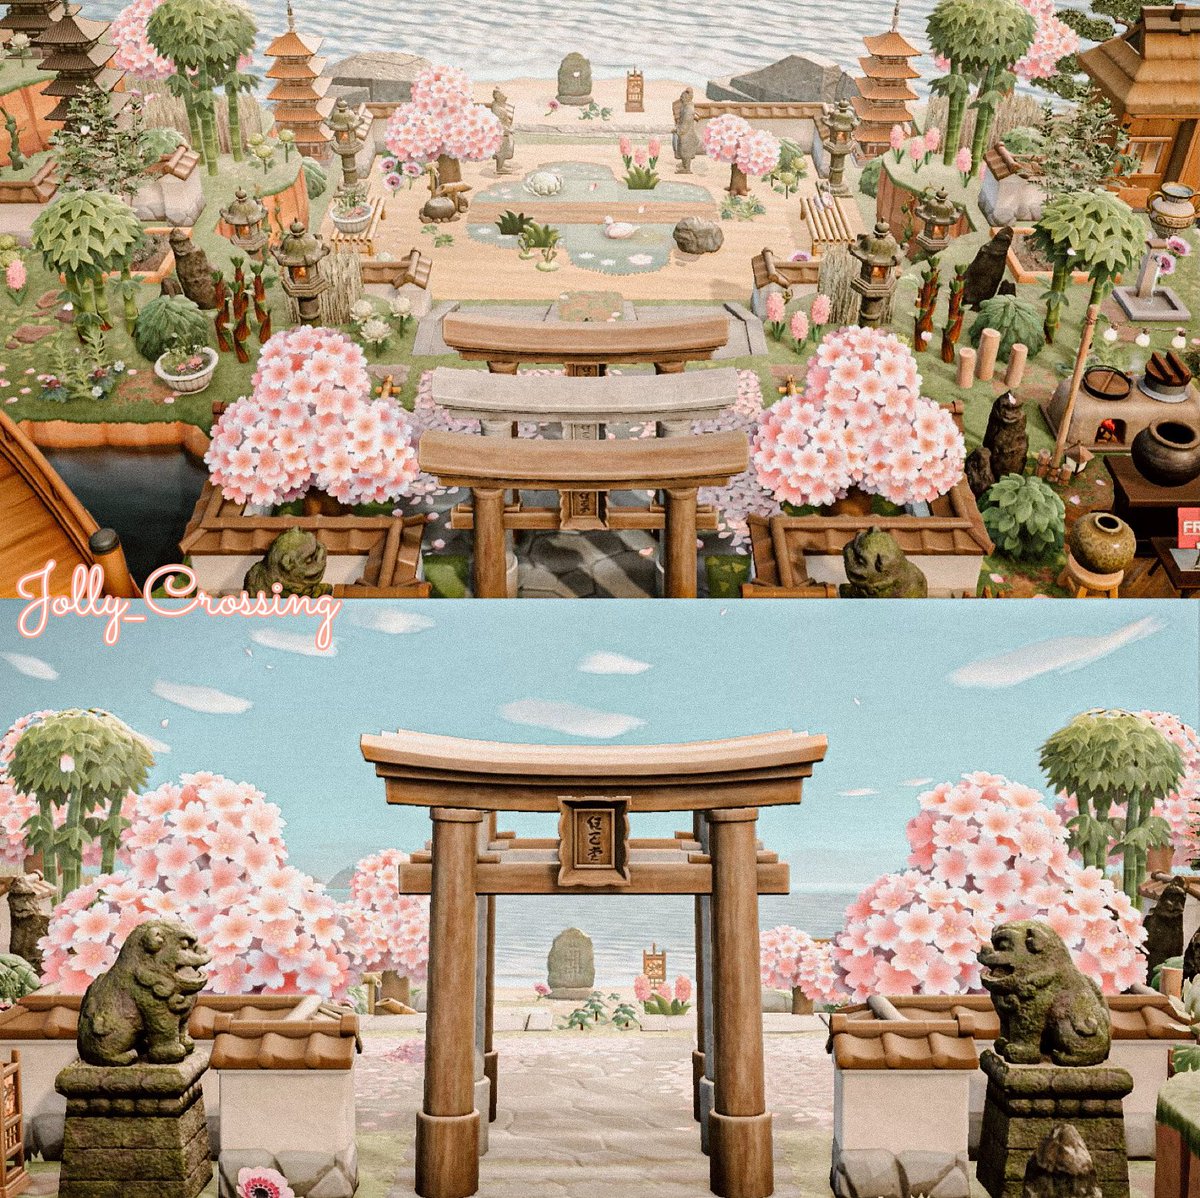 Wide angle of the zen garden before I reveal my new theme 🥺

#acnh #acnhinspo #AnimalCrossing